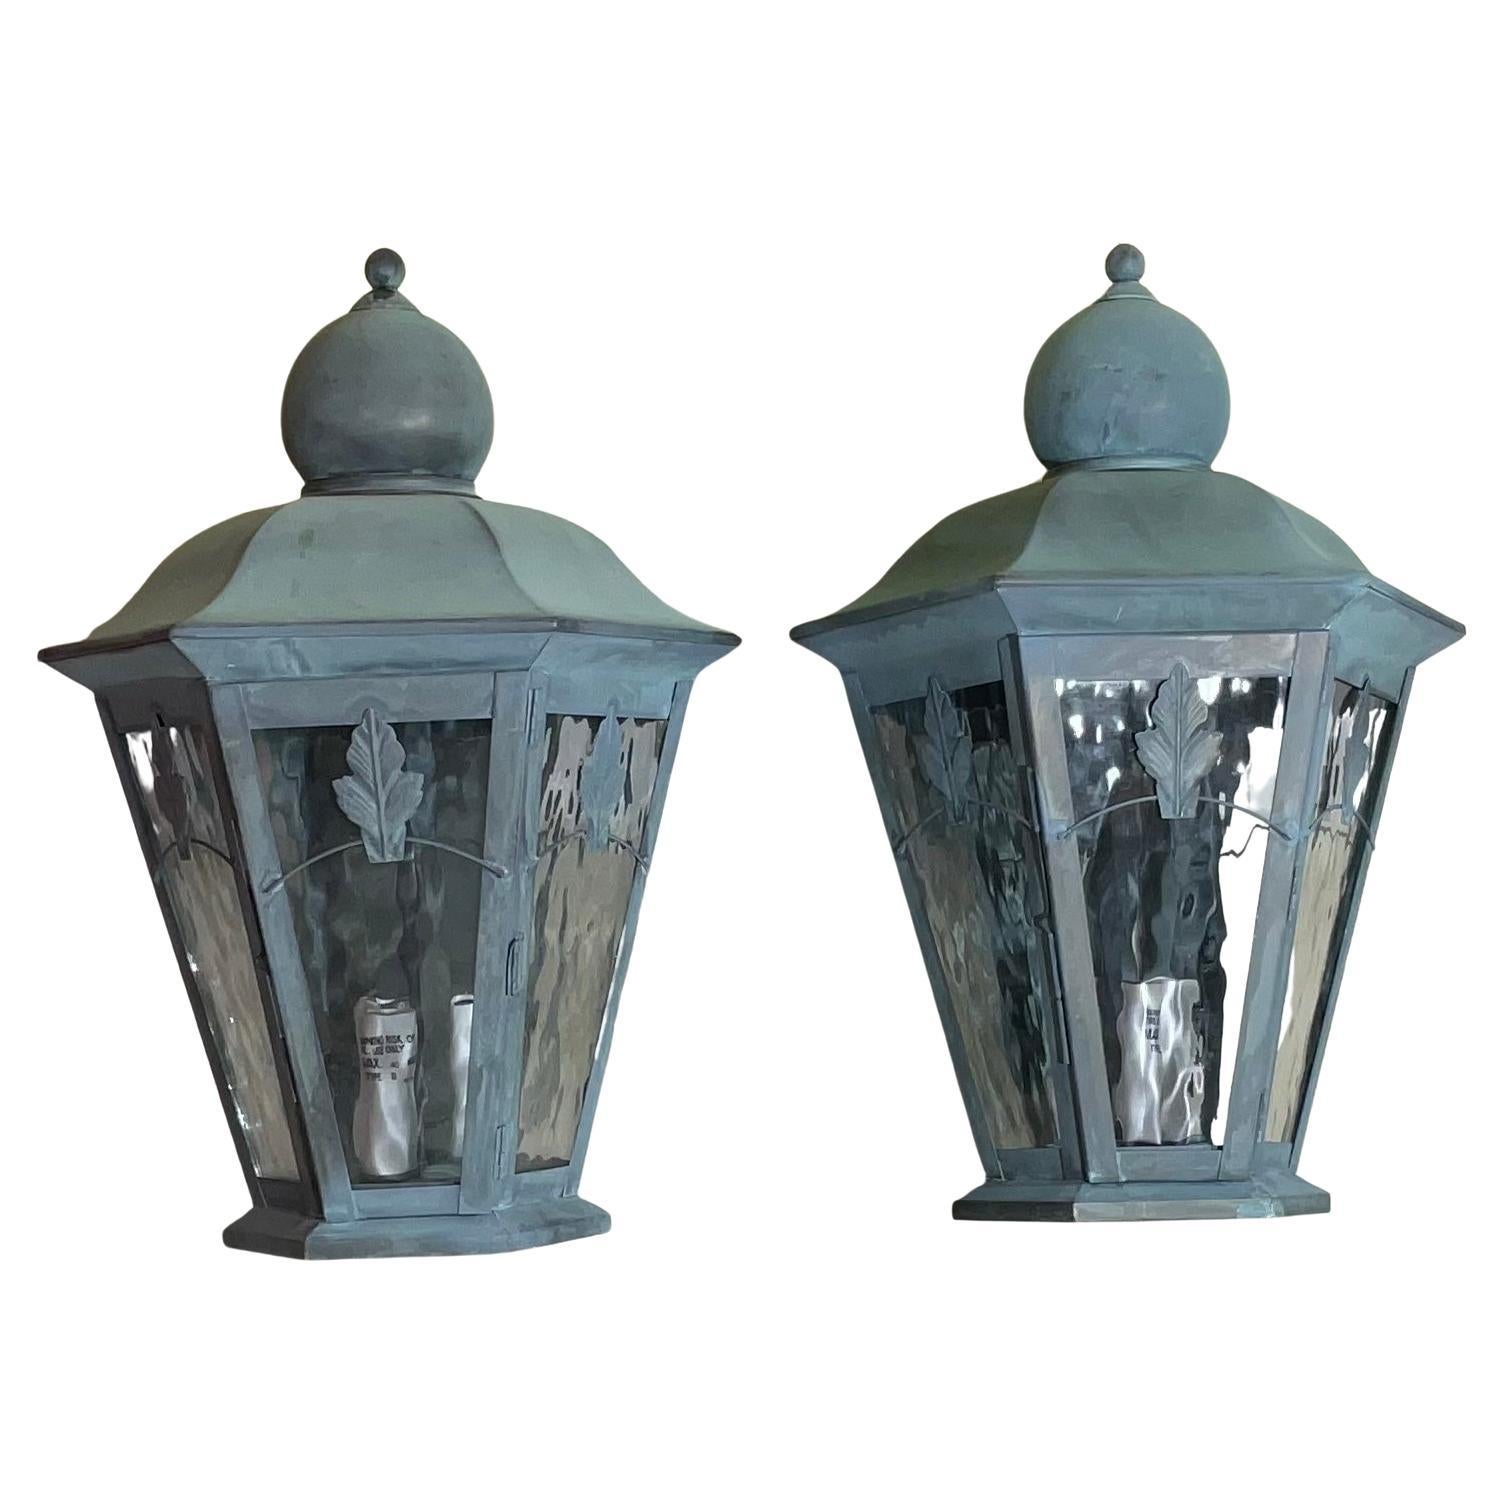 Pair of Solid Brass Wall Lantern